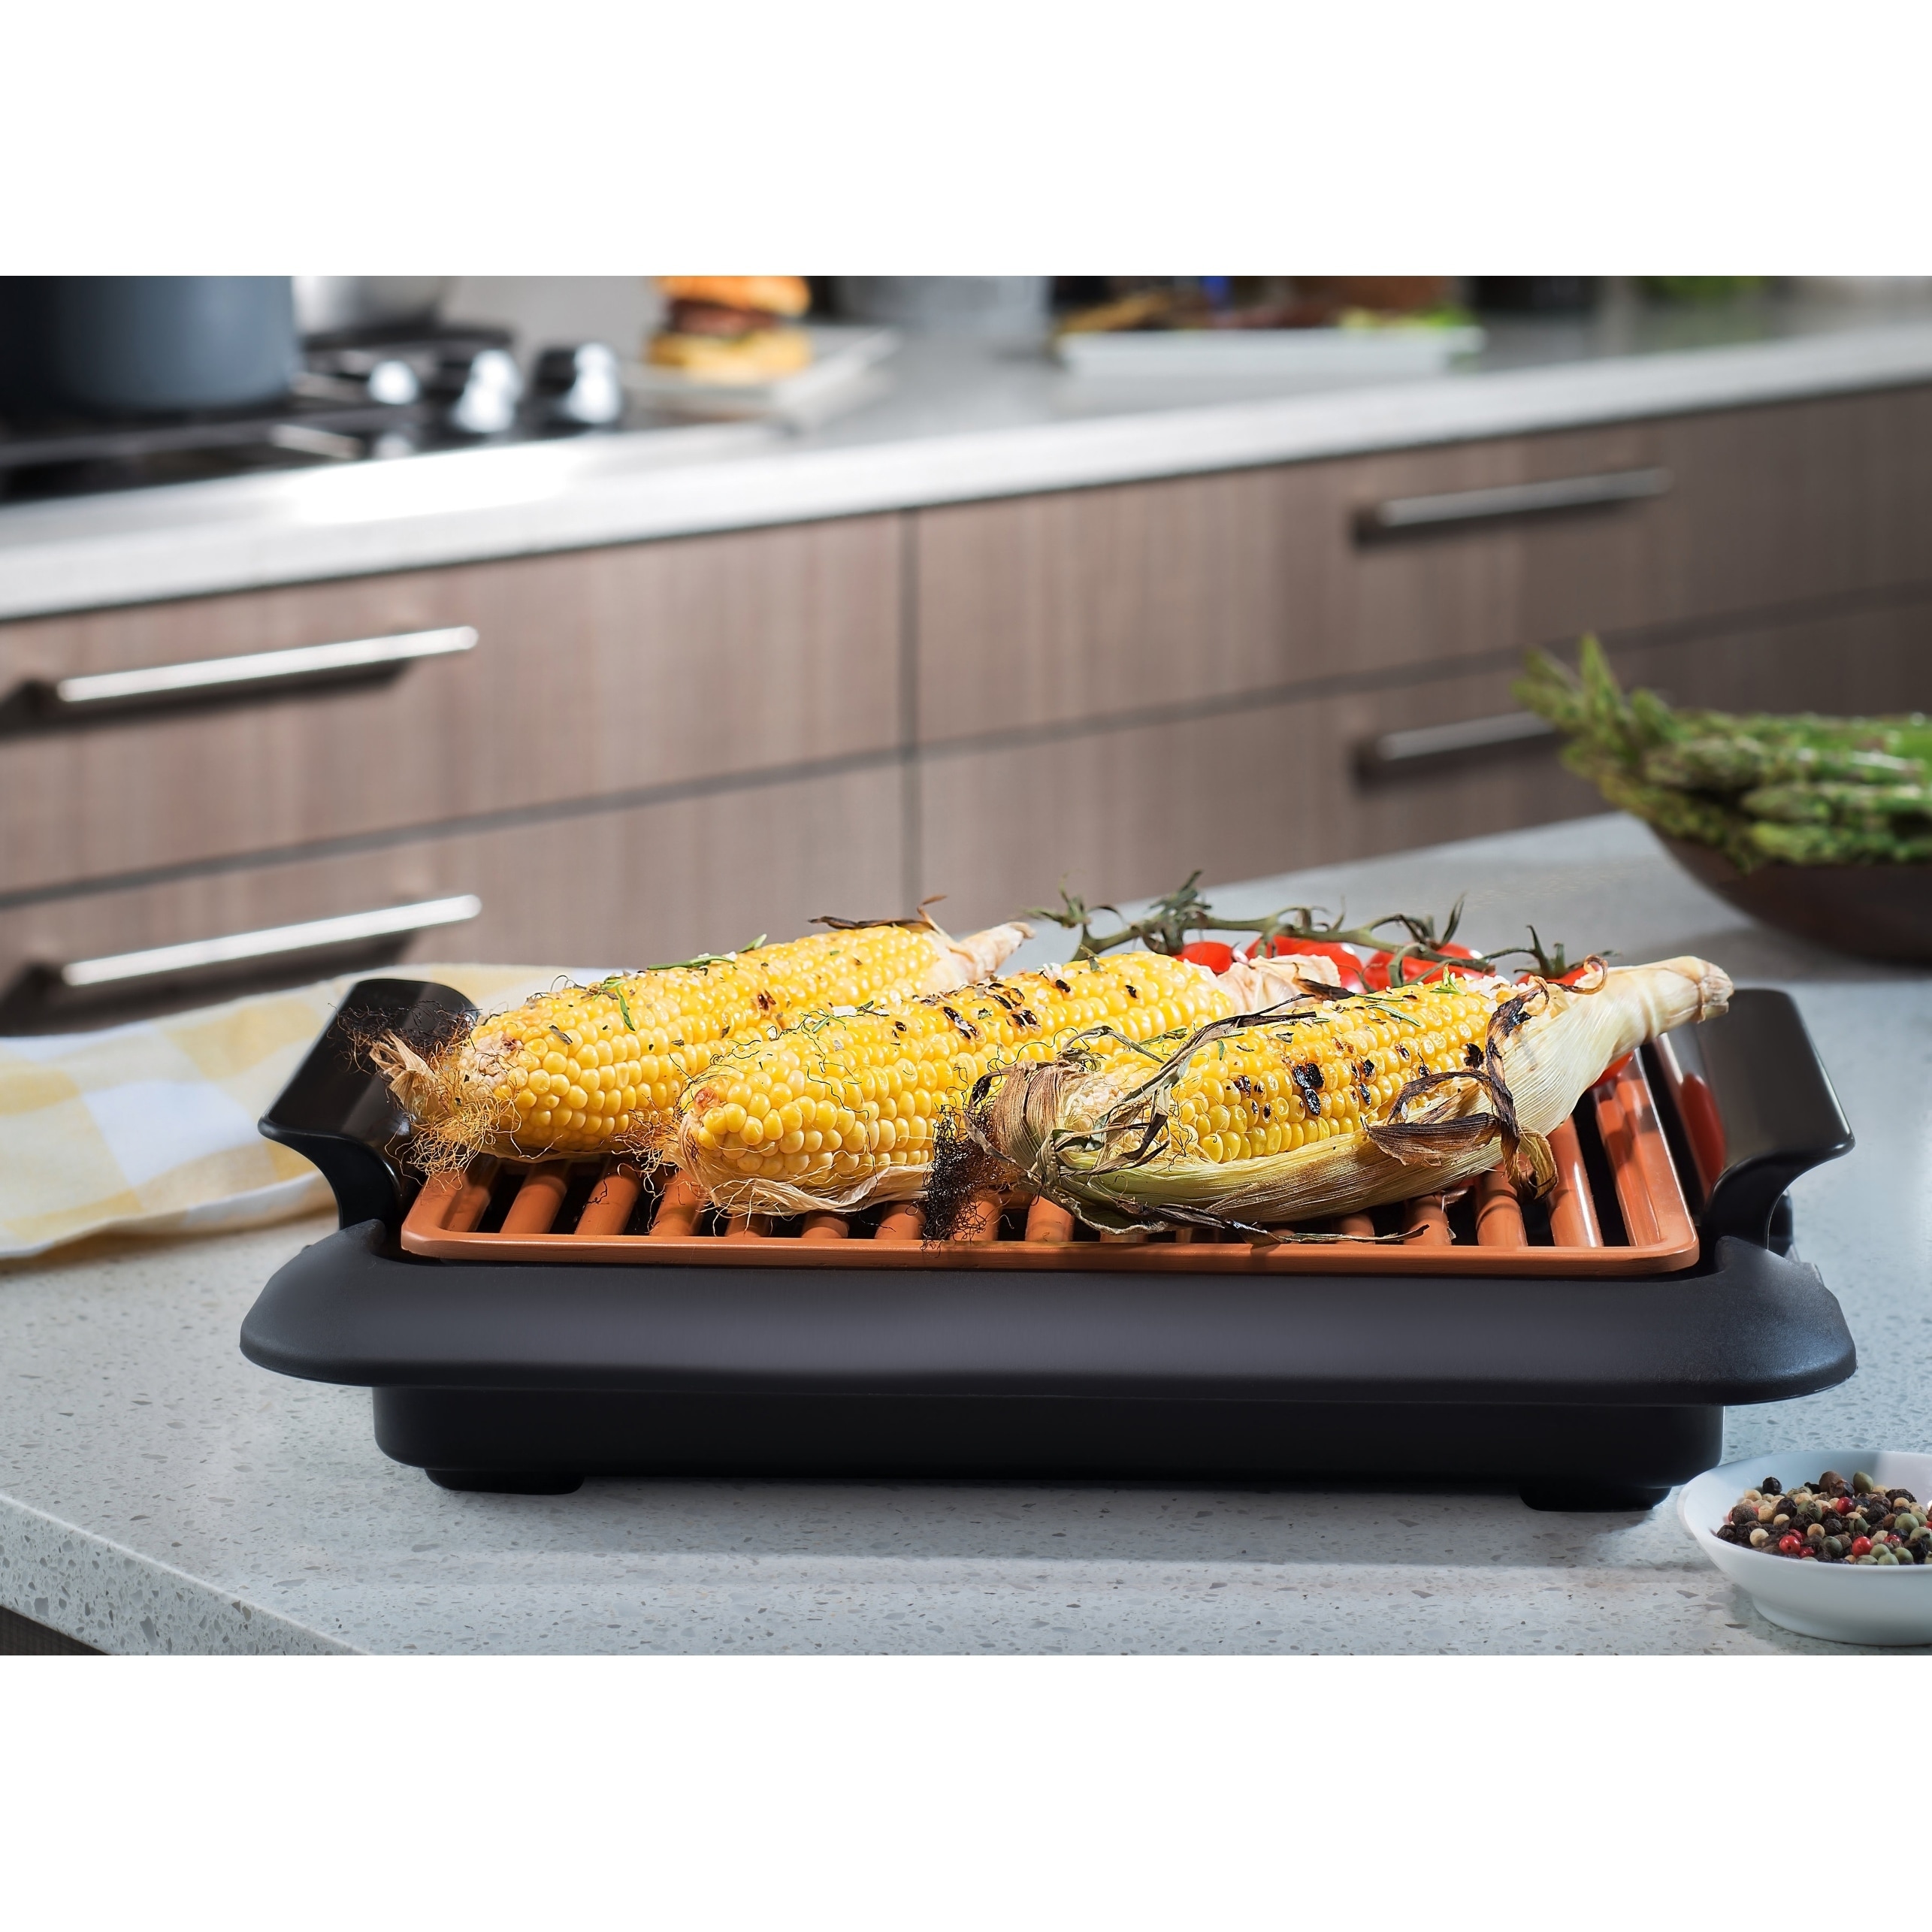 https://ak1.ostkcdn.com/images/products/17653184/Gotham-Steel-Copper-Non-stick-Indoor-Electric-Smokeless-Grill-efe6aa6b-e5d3-41ab-9080-778032e2804c.jpg